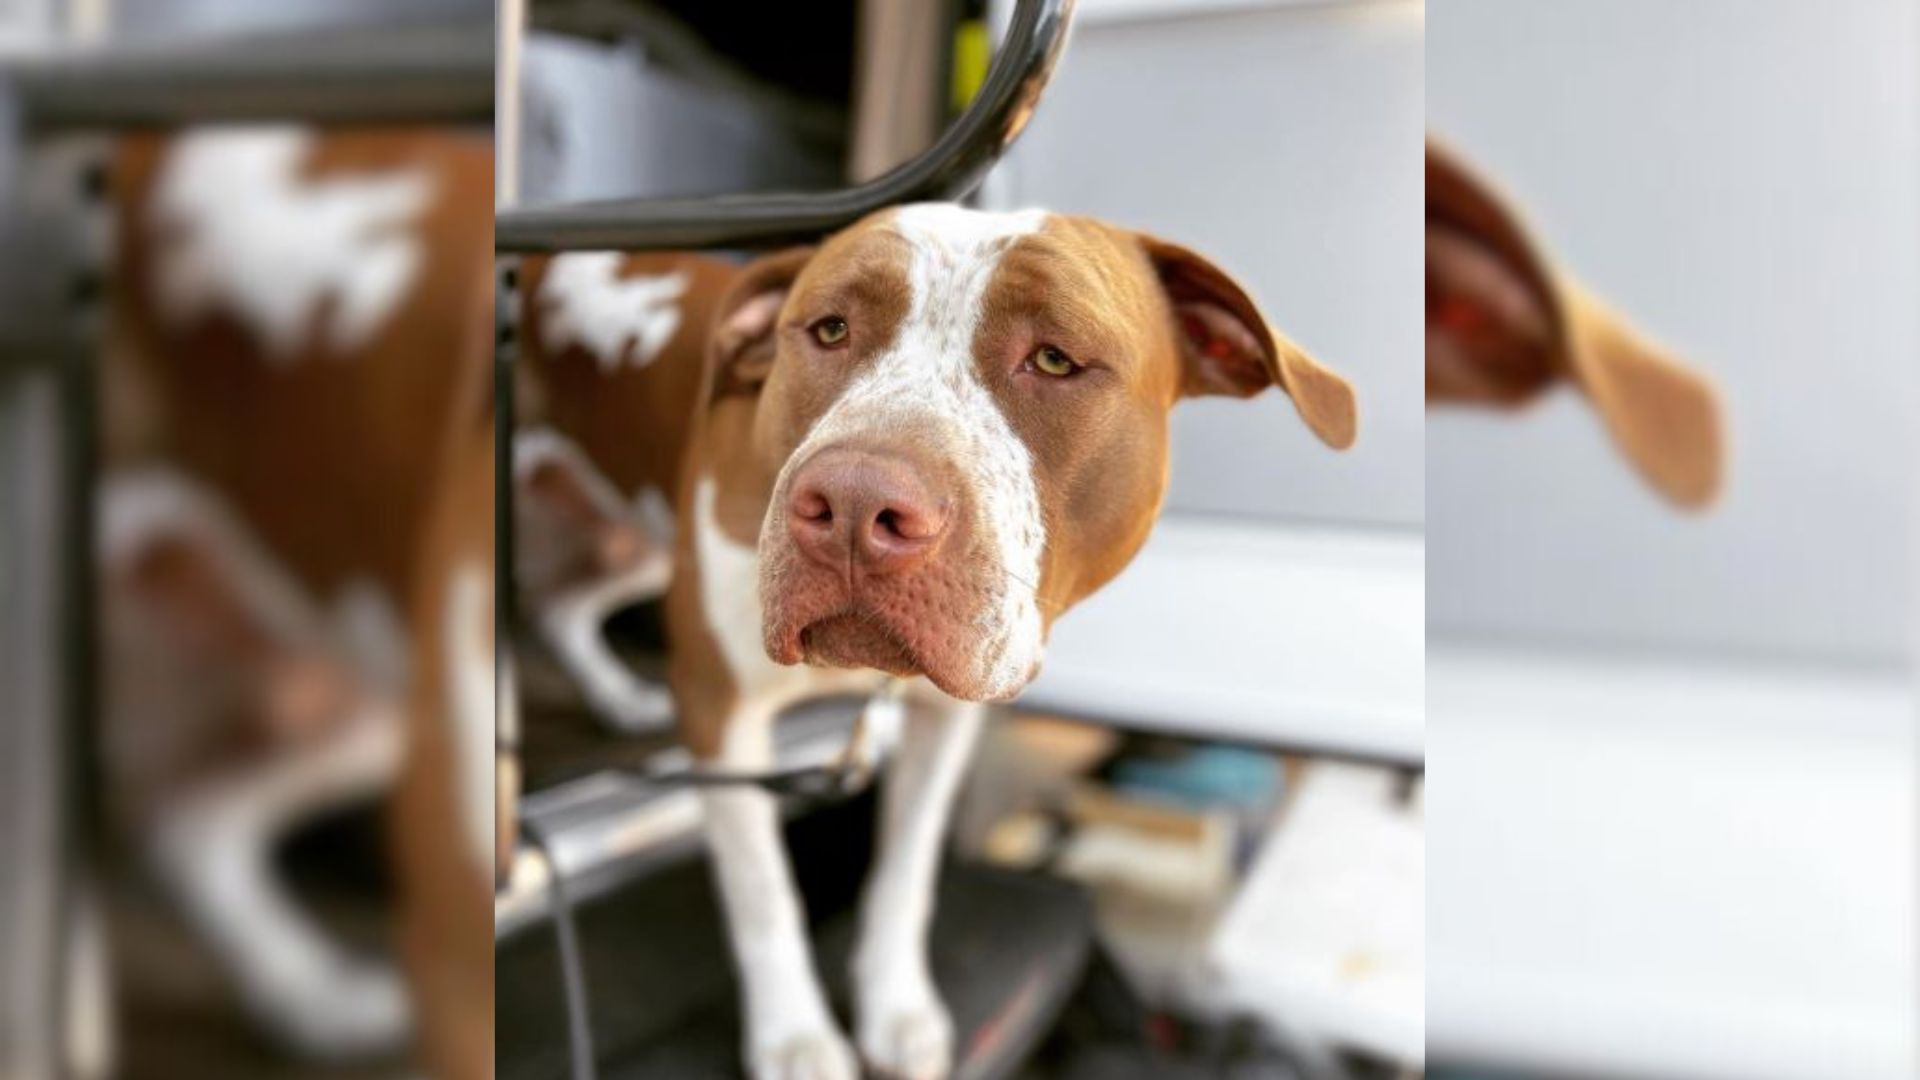 Boyfriend Was Not Sure About Adopting A Pit Bull But Then His Girlfriend Surprised Him With One